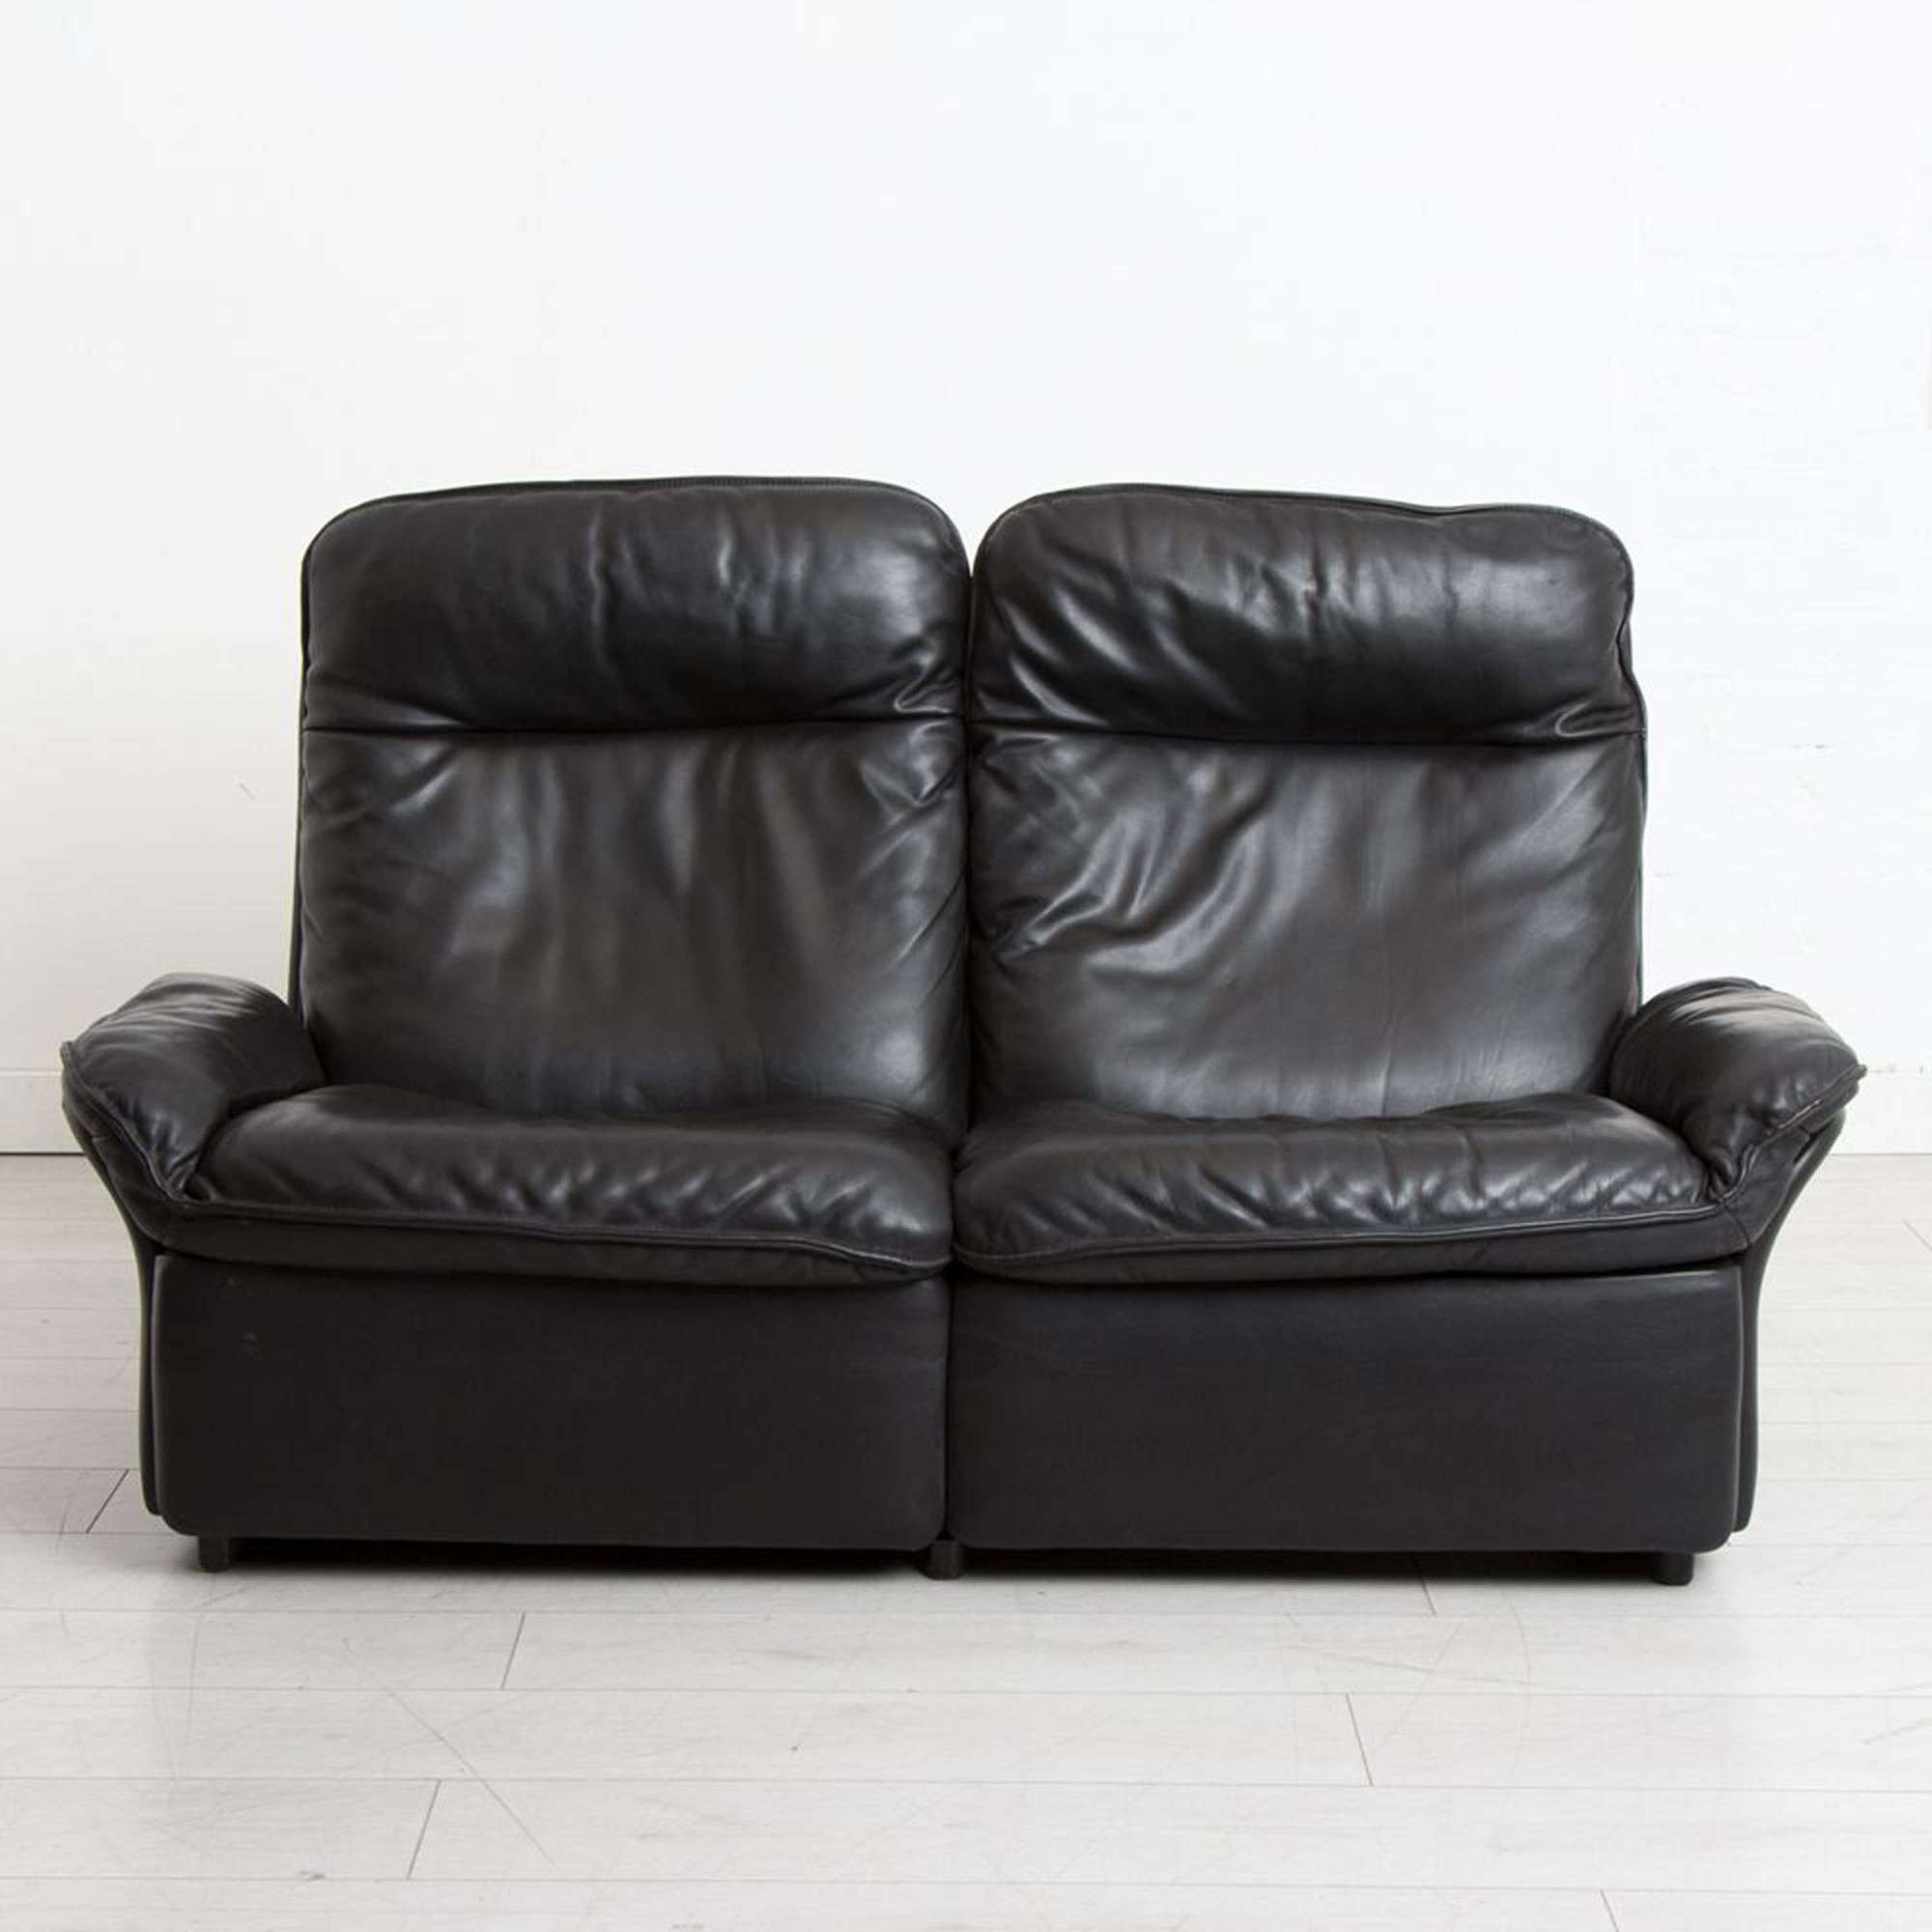 Midcentury Black Leather 2 Seater Sofa by De Sede Model DS66